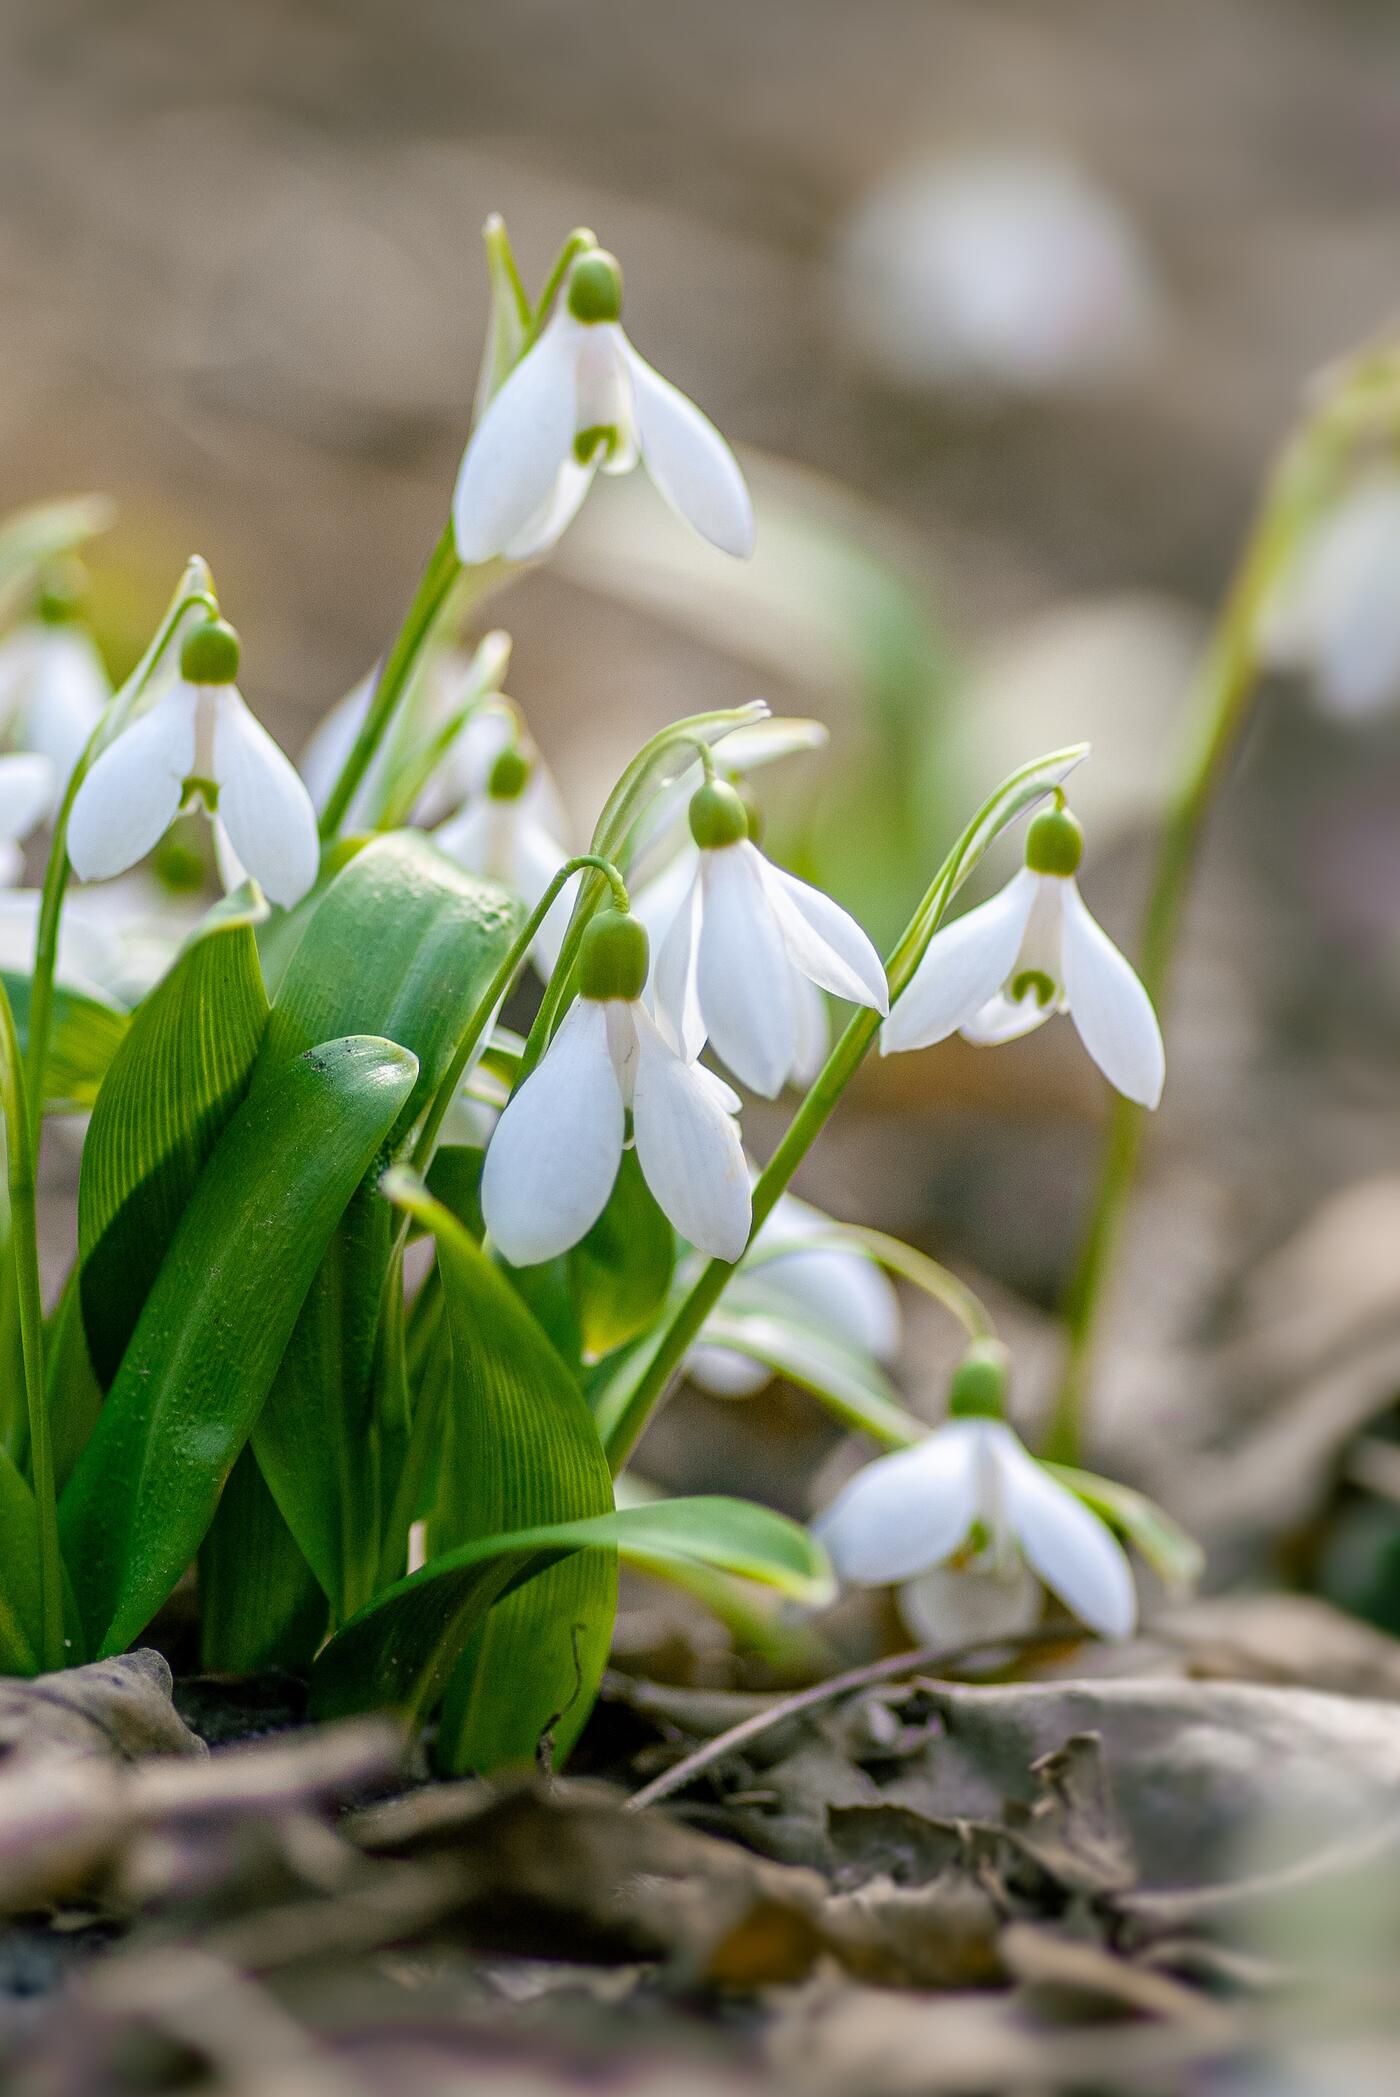 Snowdrop flowers, blooming green and white from a brown-leaf covered ground